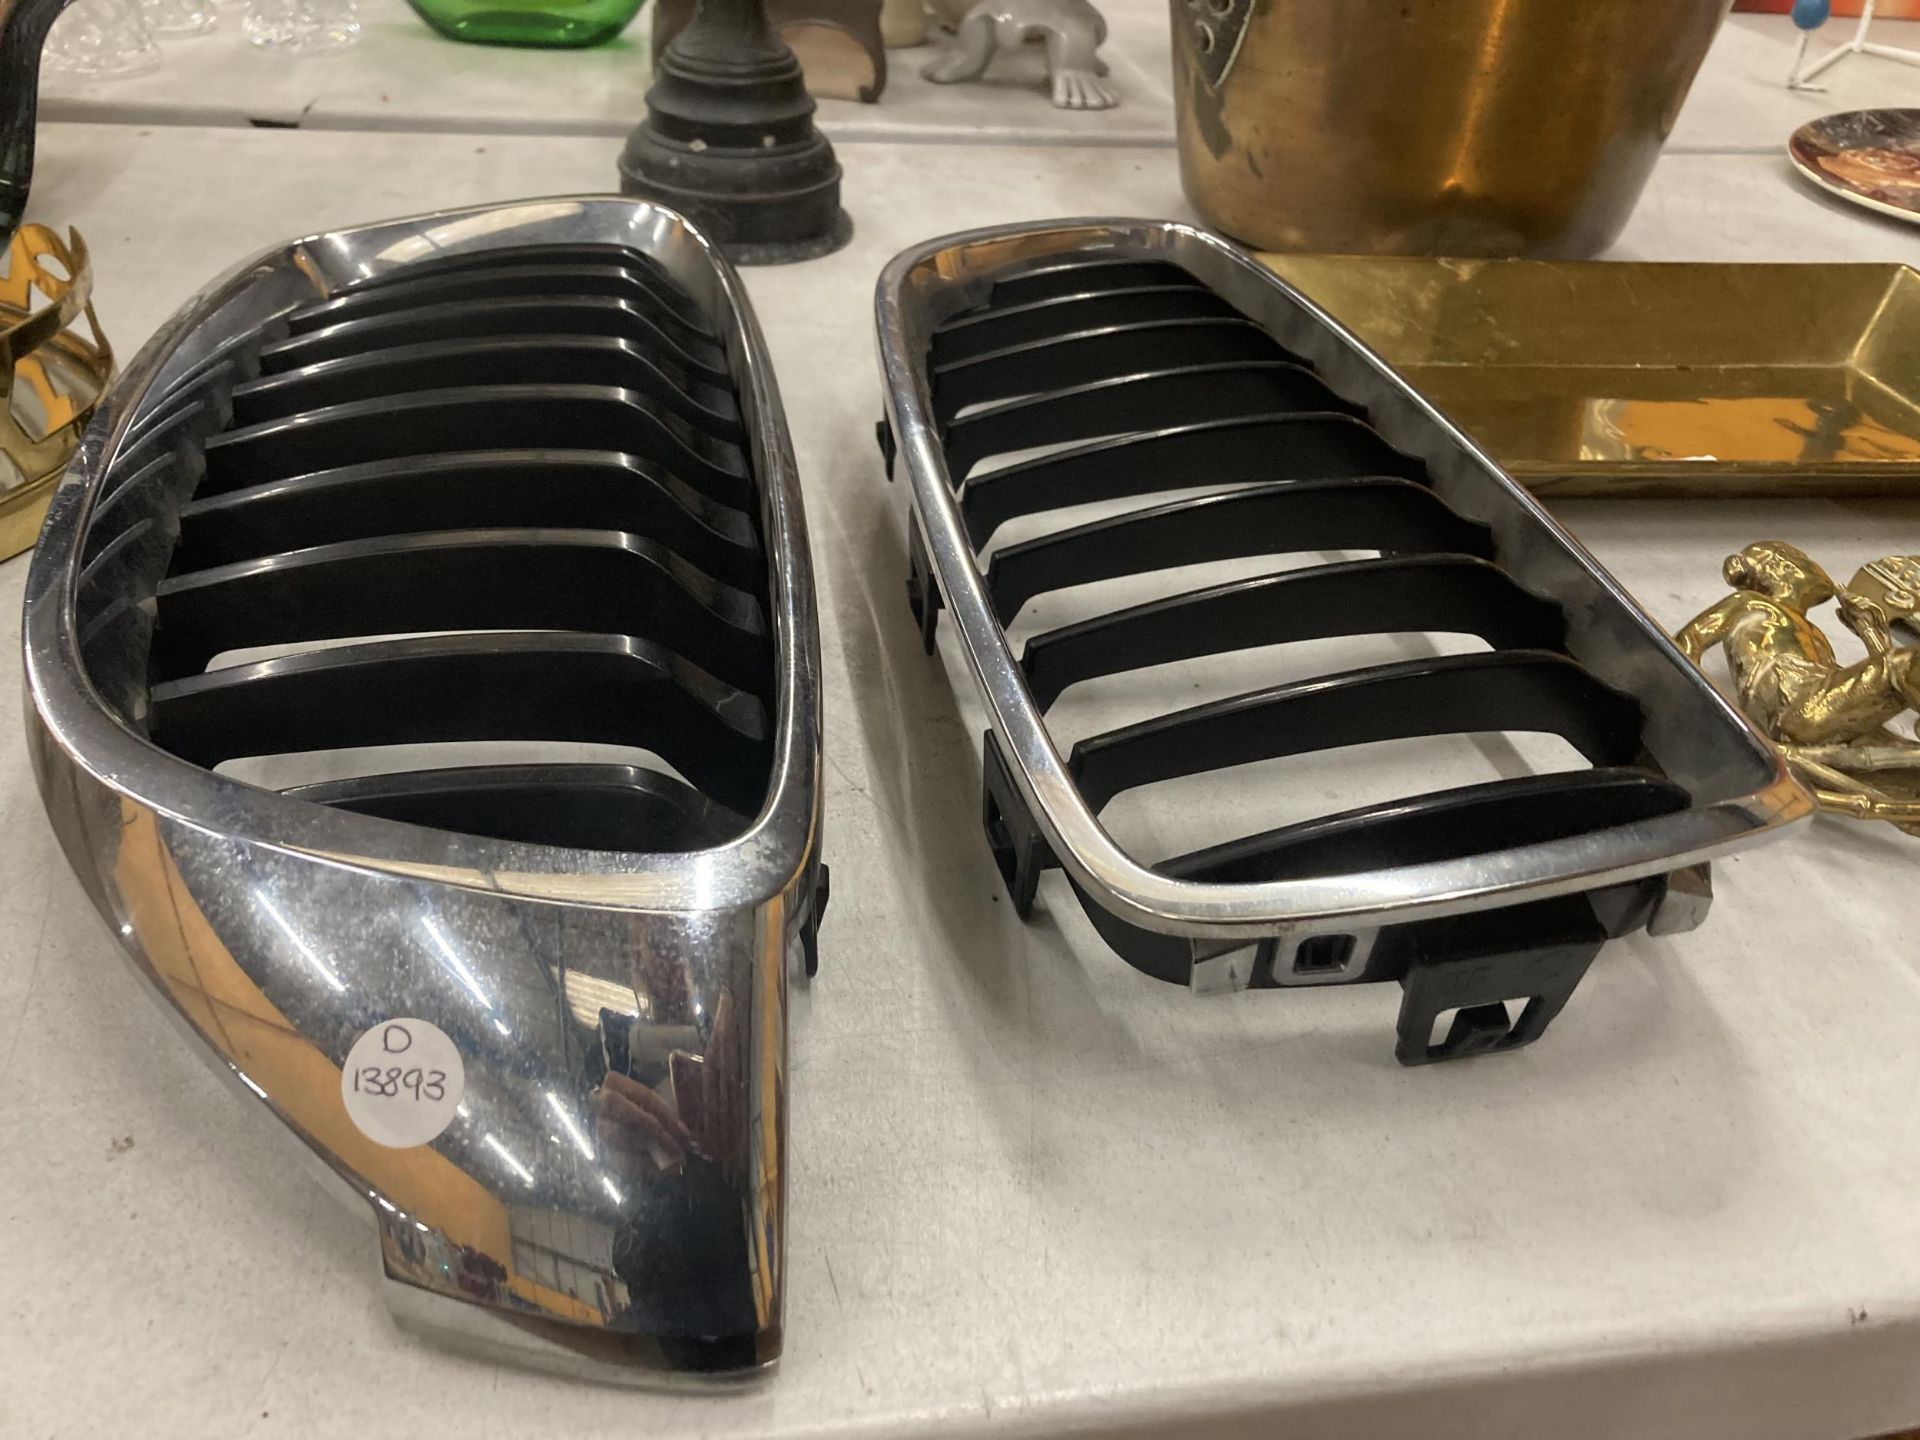 A PAIR OF BMW CAR GRILLS - Image 3 of 3